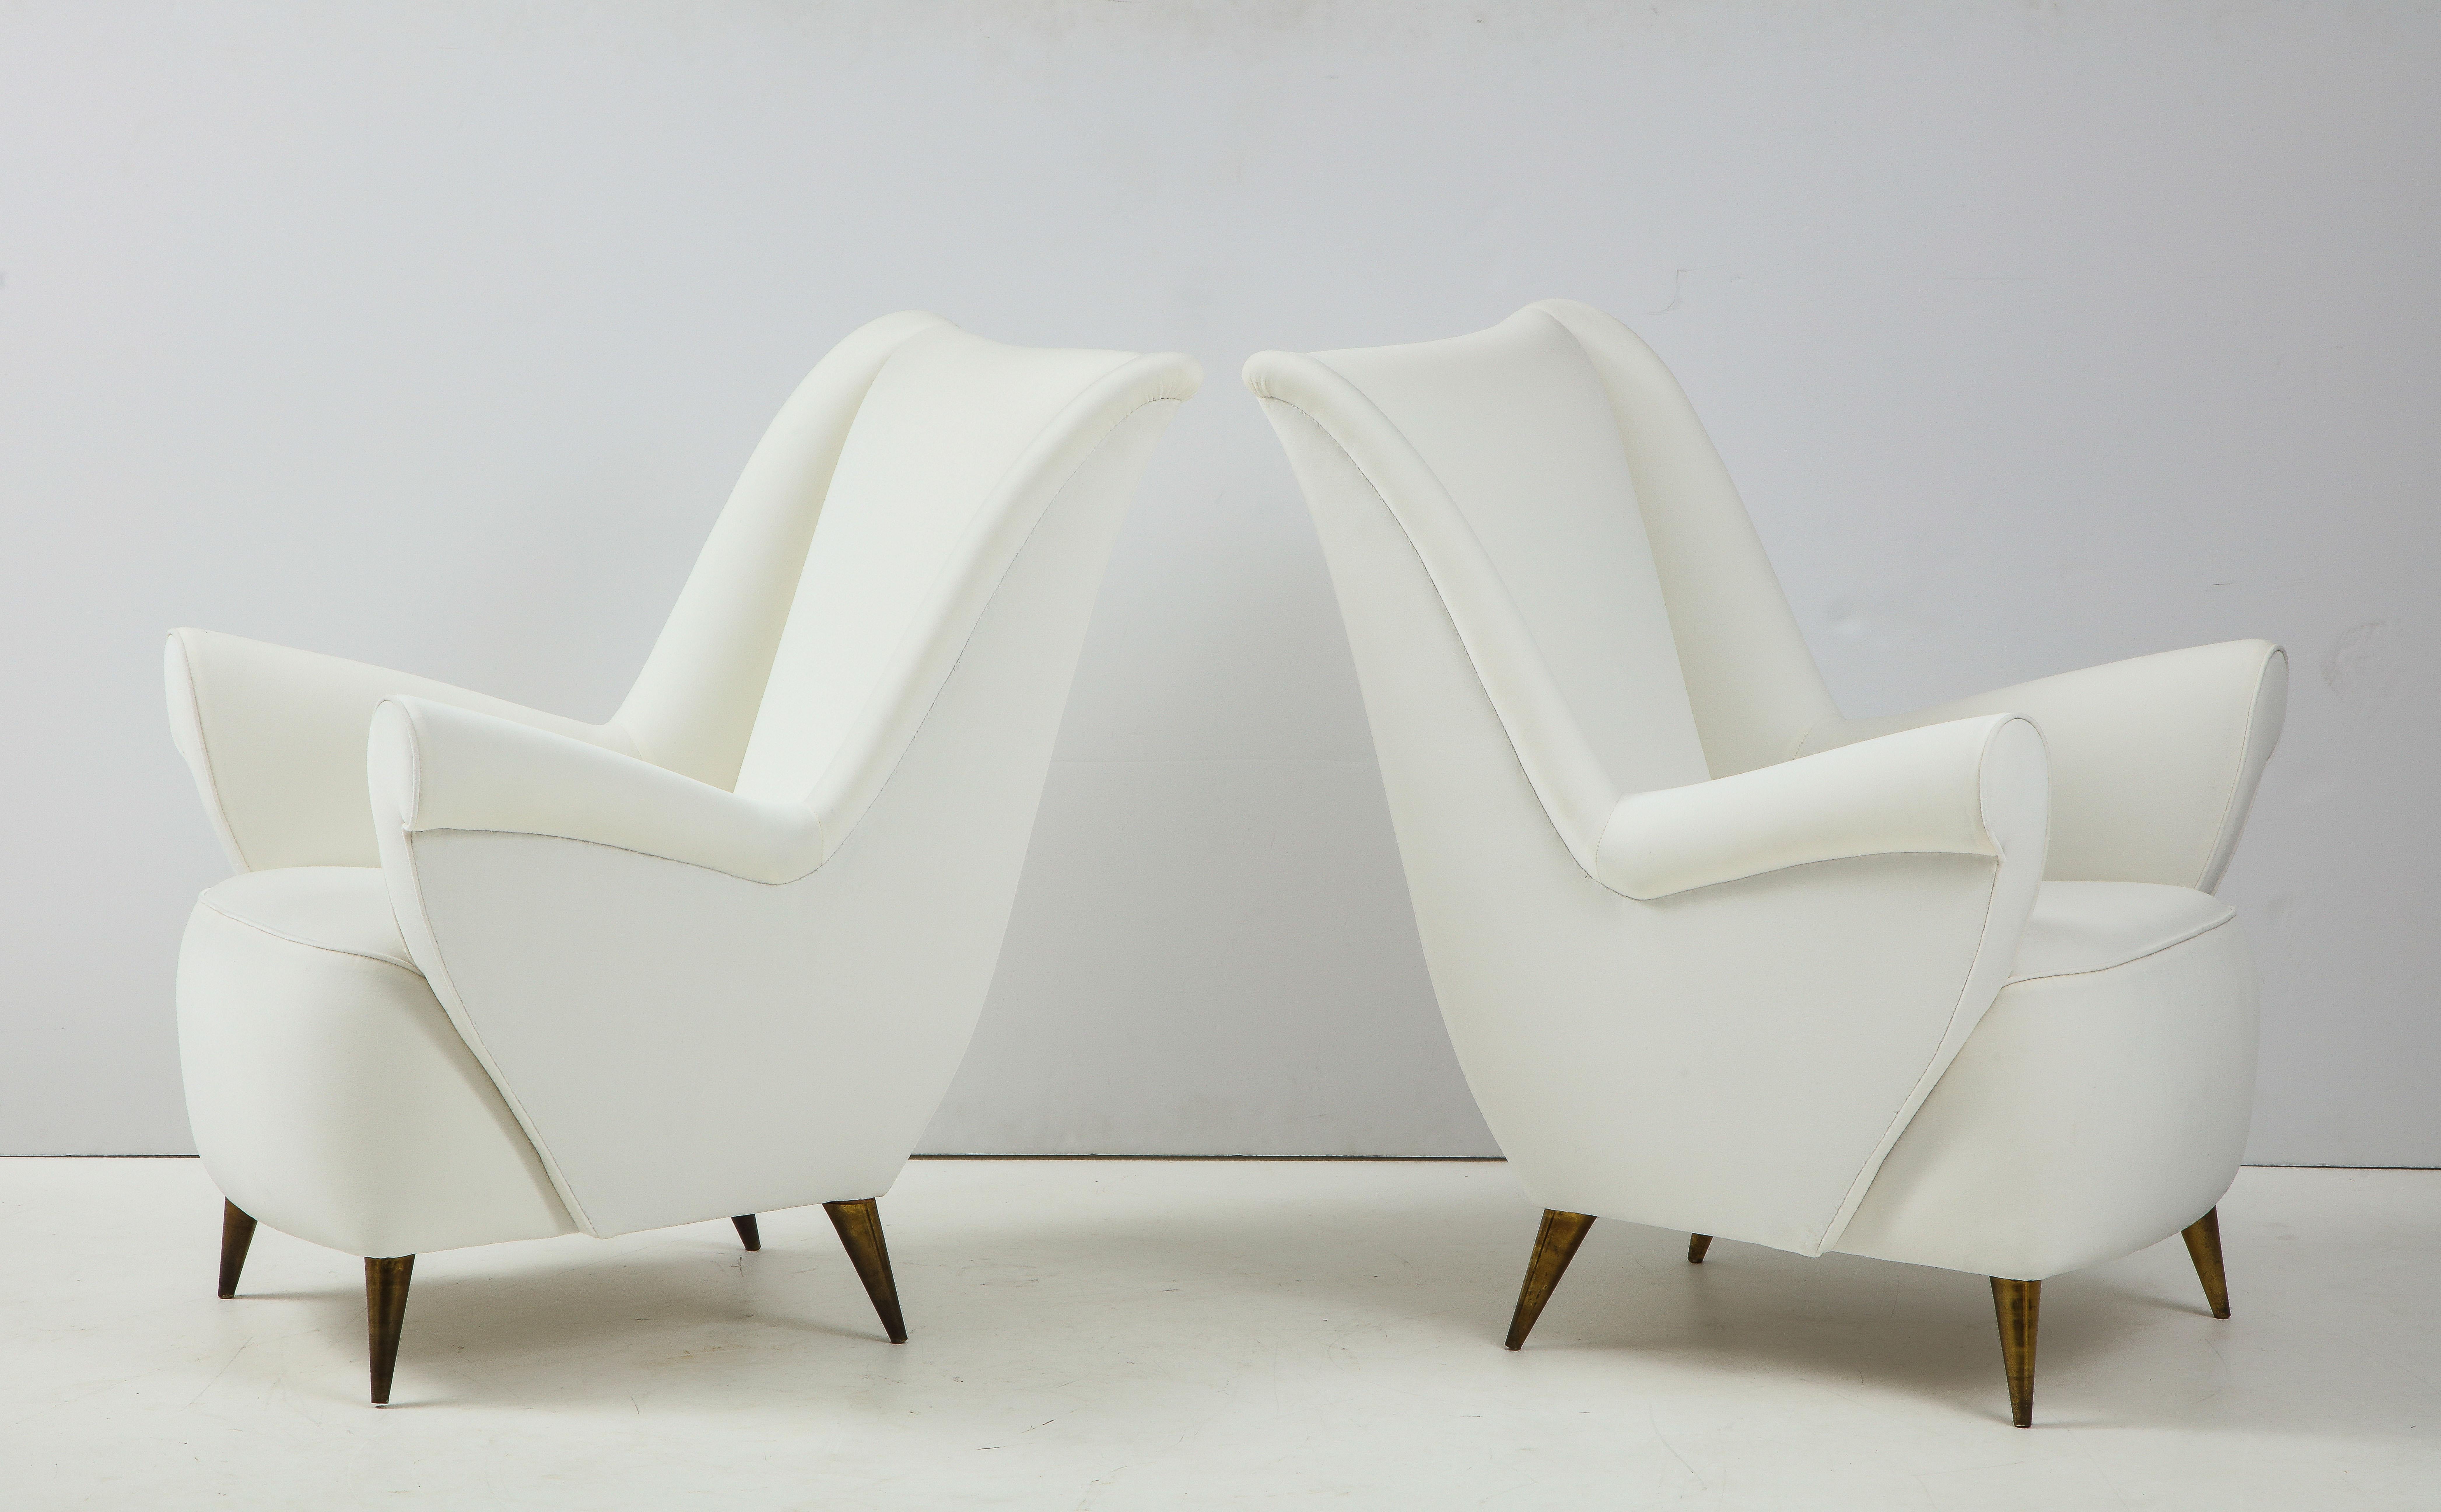 Brass Pair of Italian Vintage Lounge Chairs by Gio Ponti for ISA Bergamo